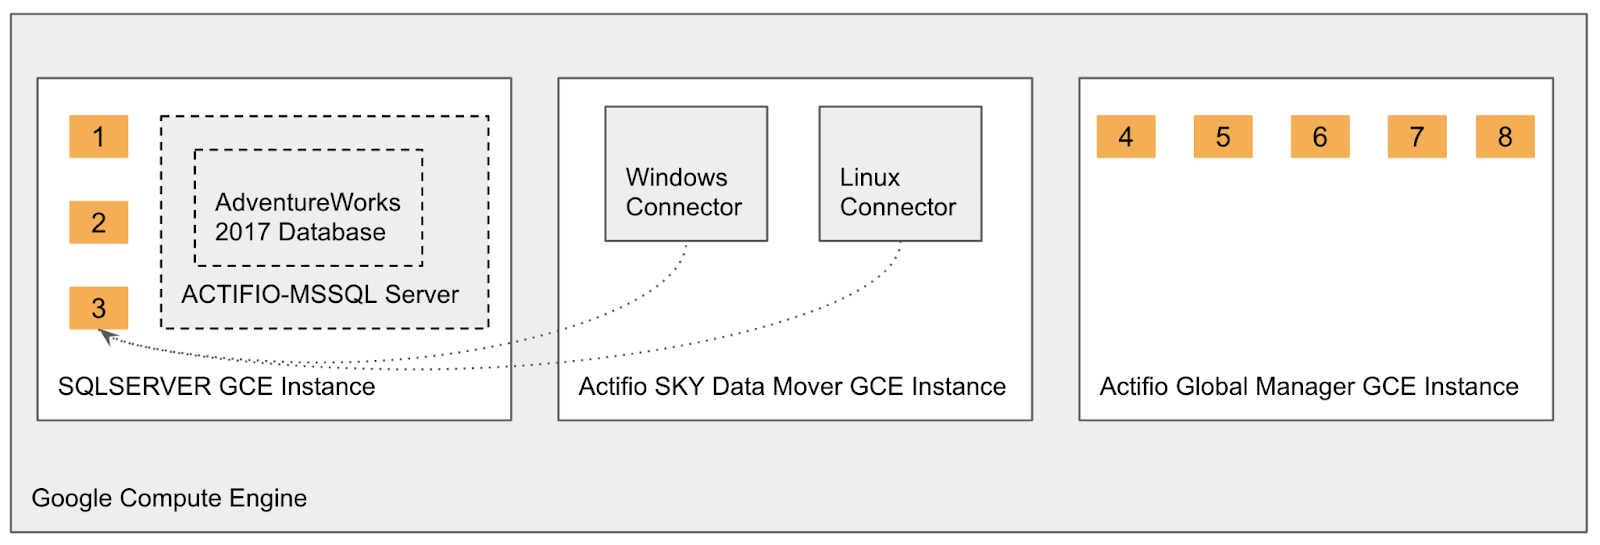 The lab environment divided into three GCE instances; SQLSERVER, Actifio SKY Data Mover, and Actifio Global Manager